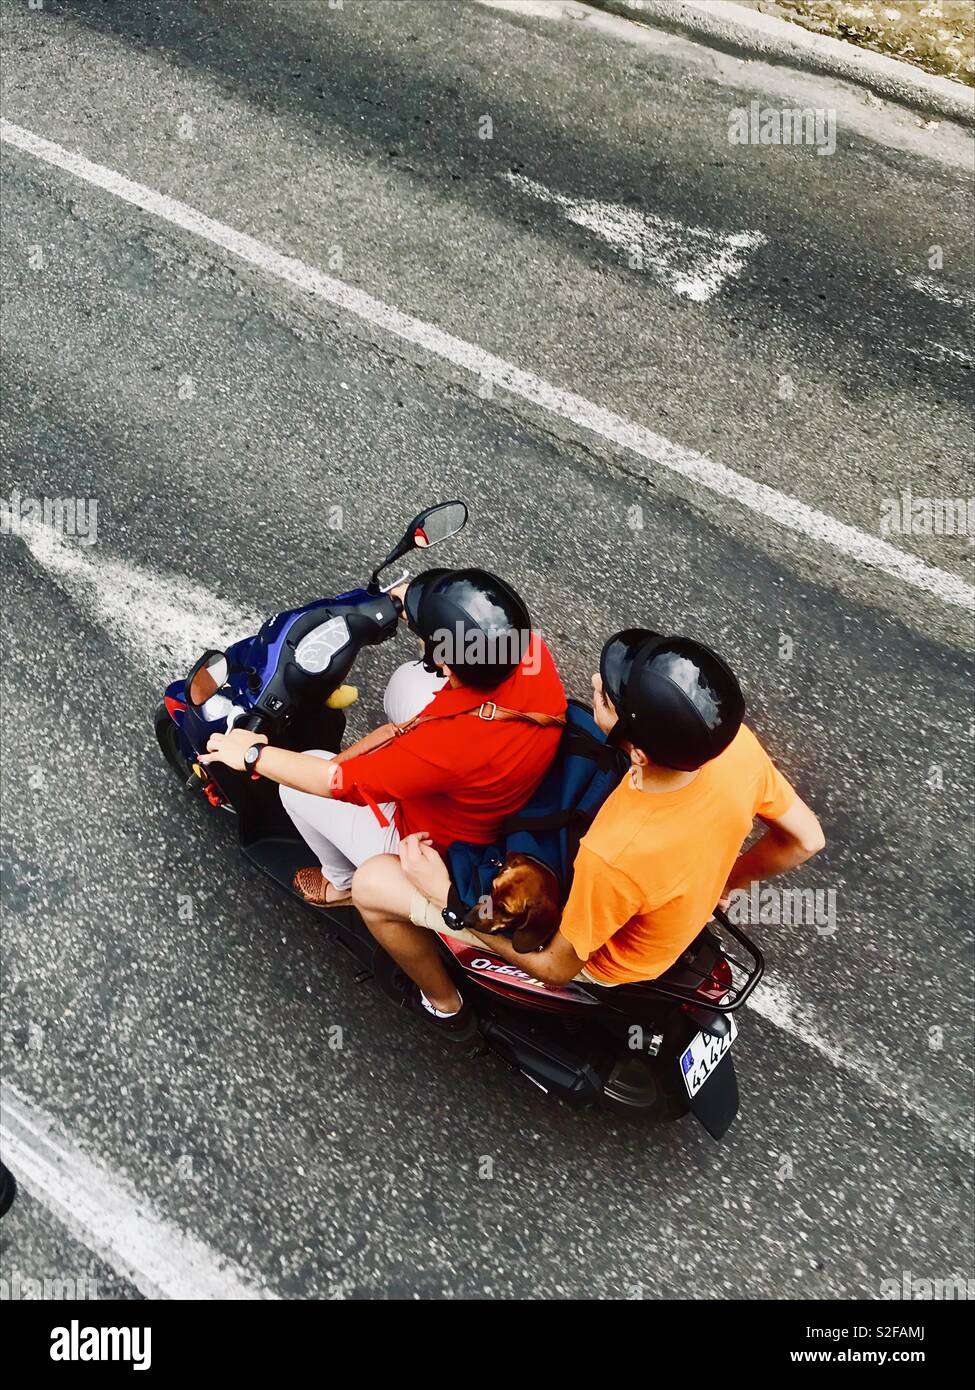 Two people riding a motorbike in the streets of Havana Cuba Stock Photo